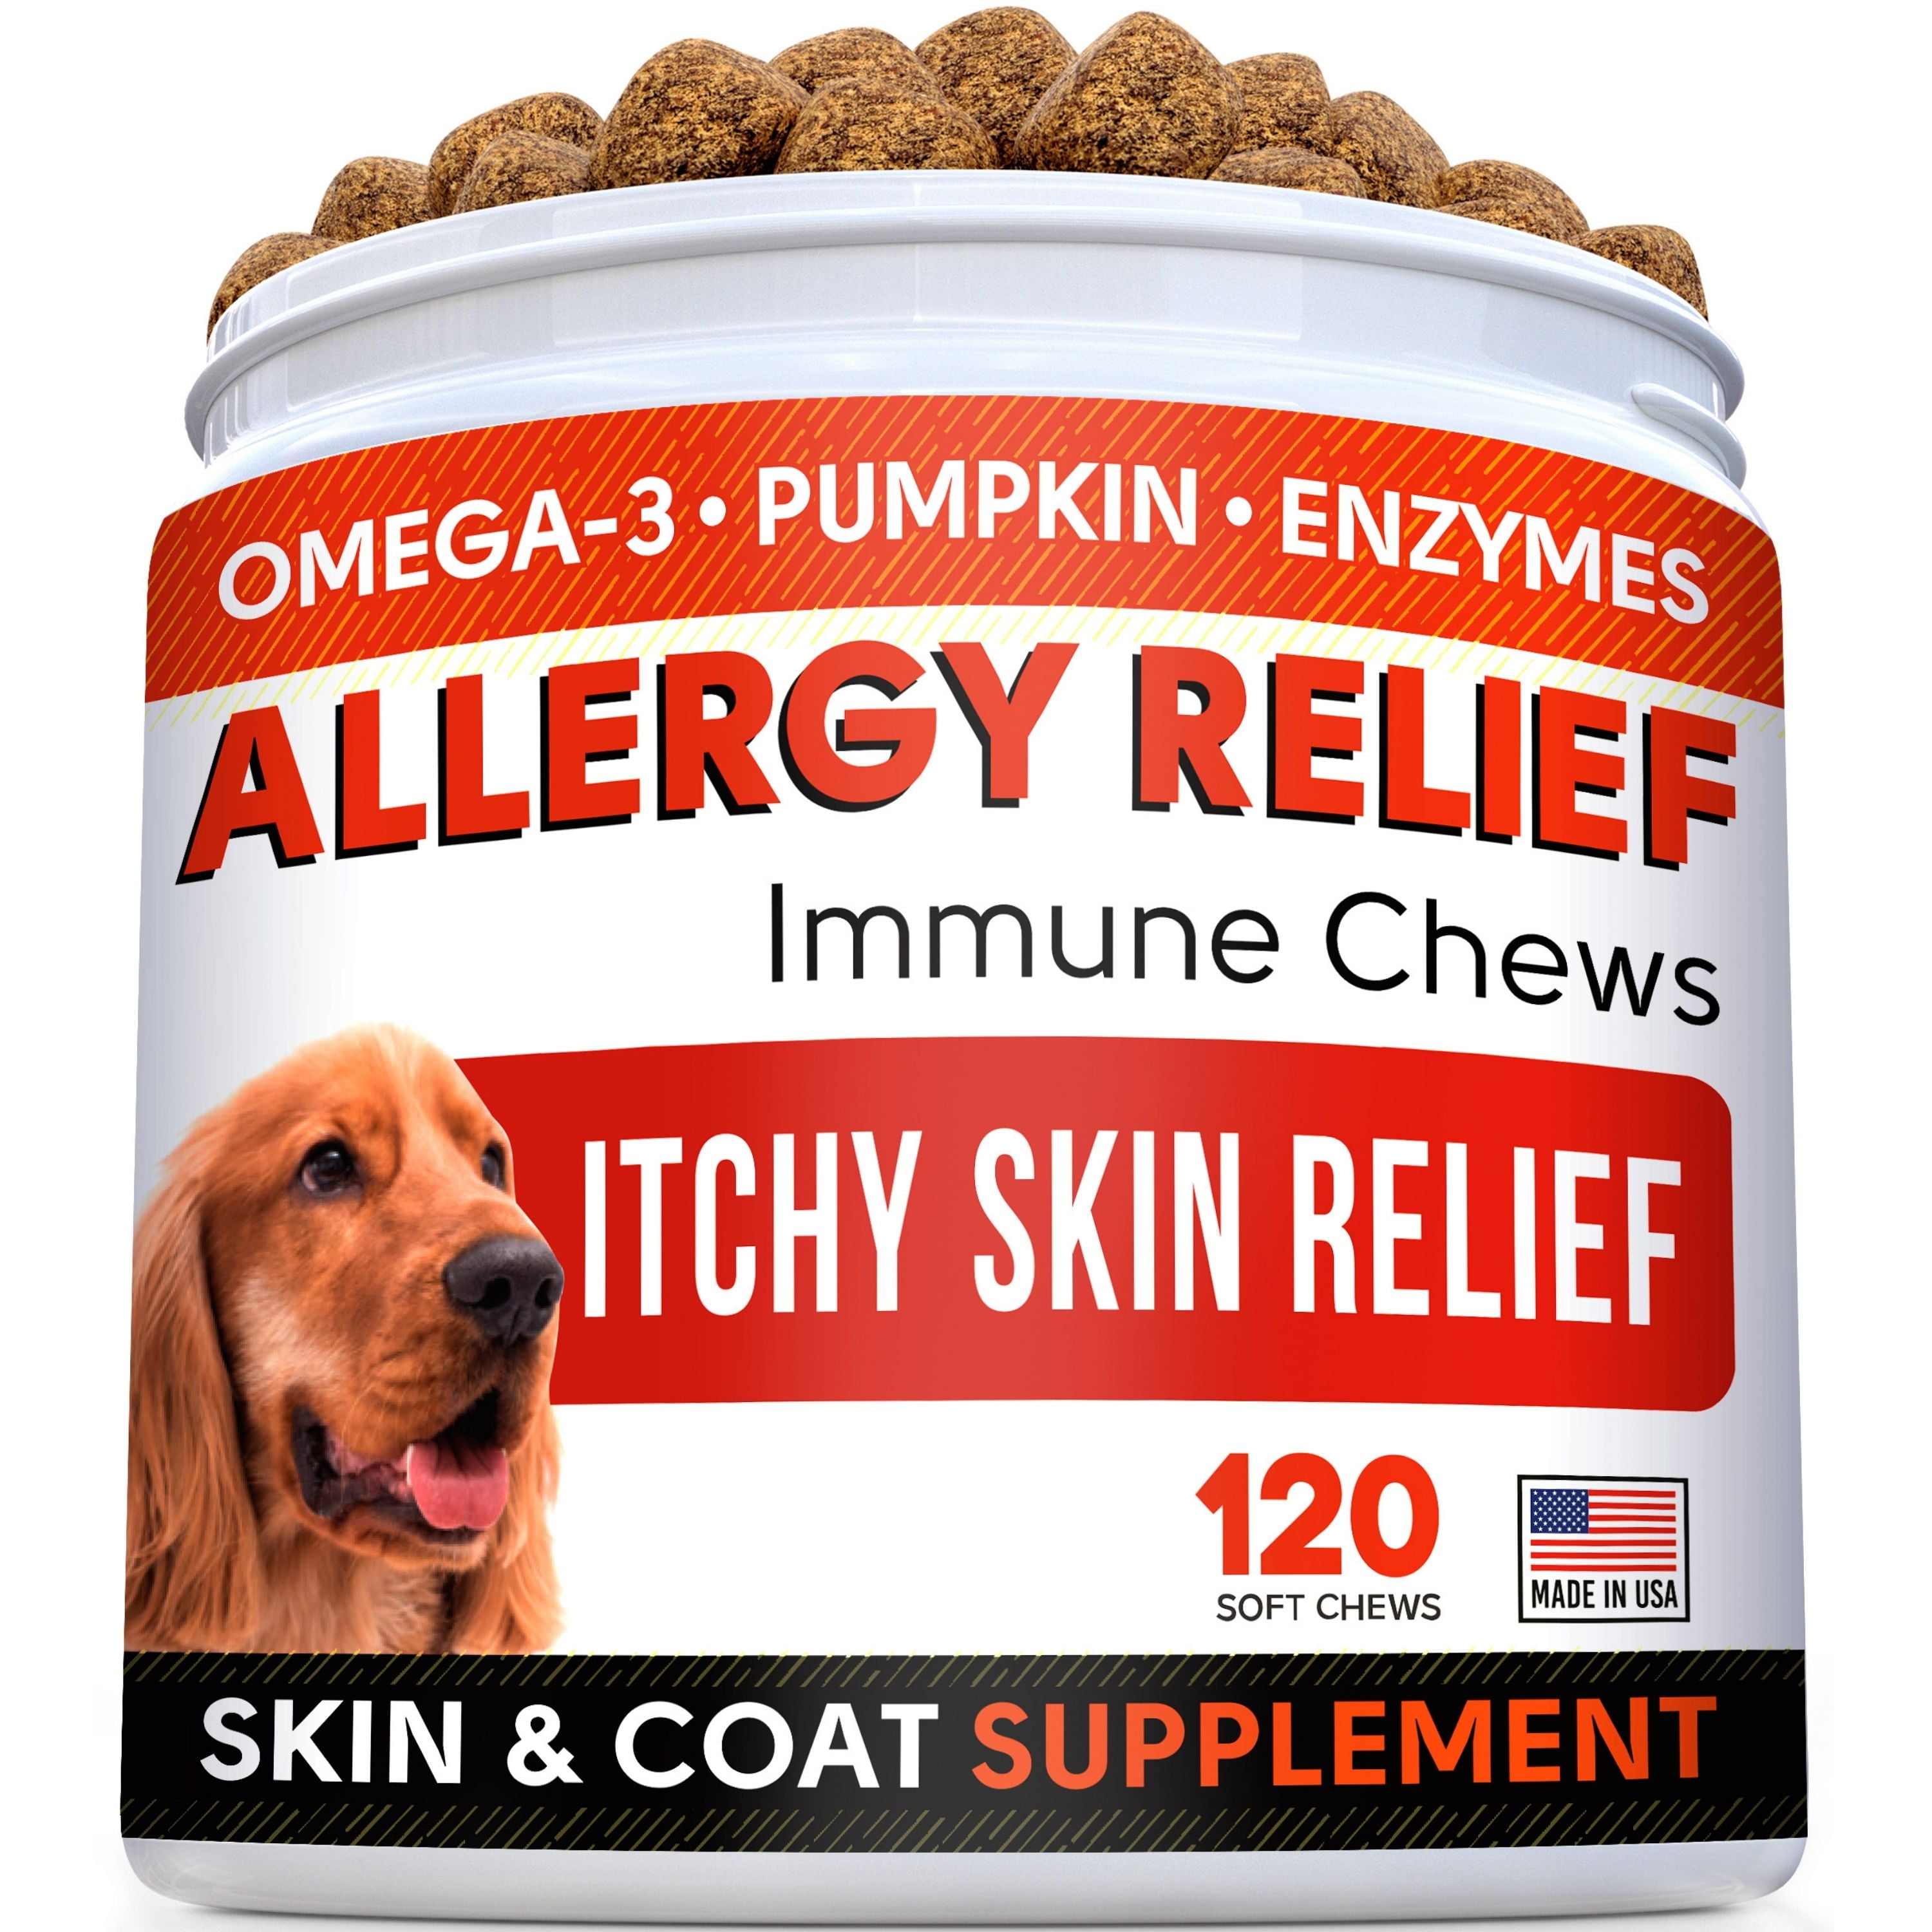 Allergy Relief Chews for Dogs with Omega 3 Itchy Skin Relief Immune 